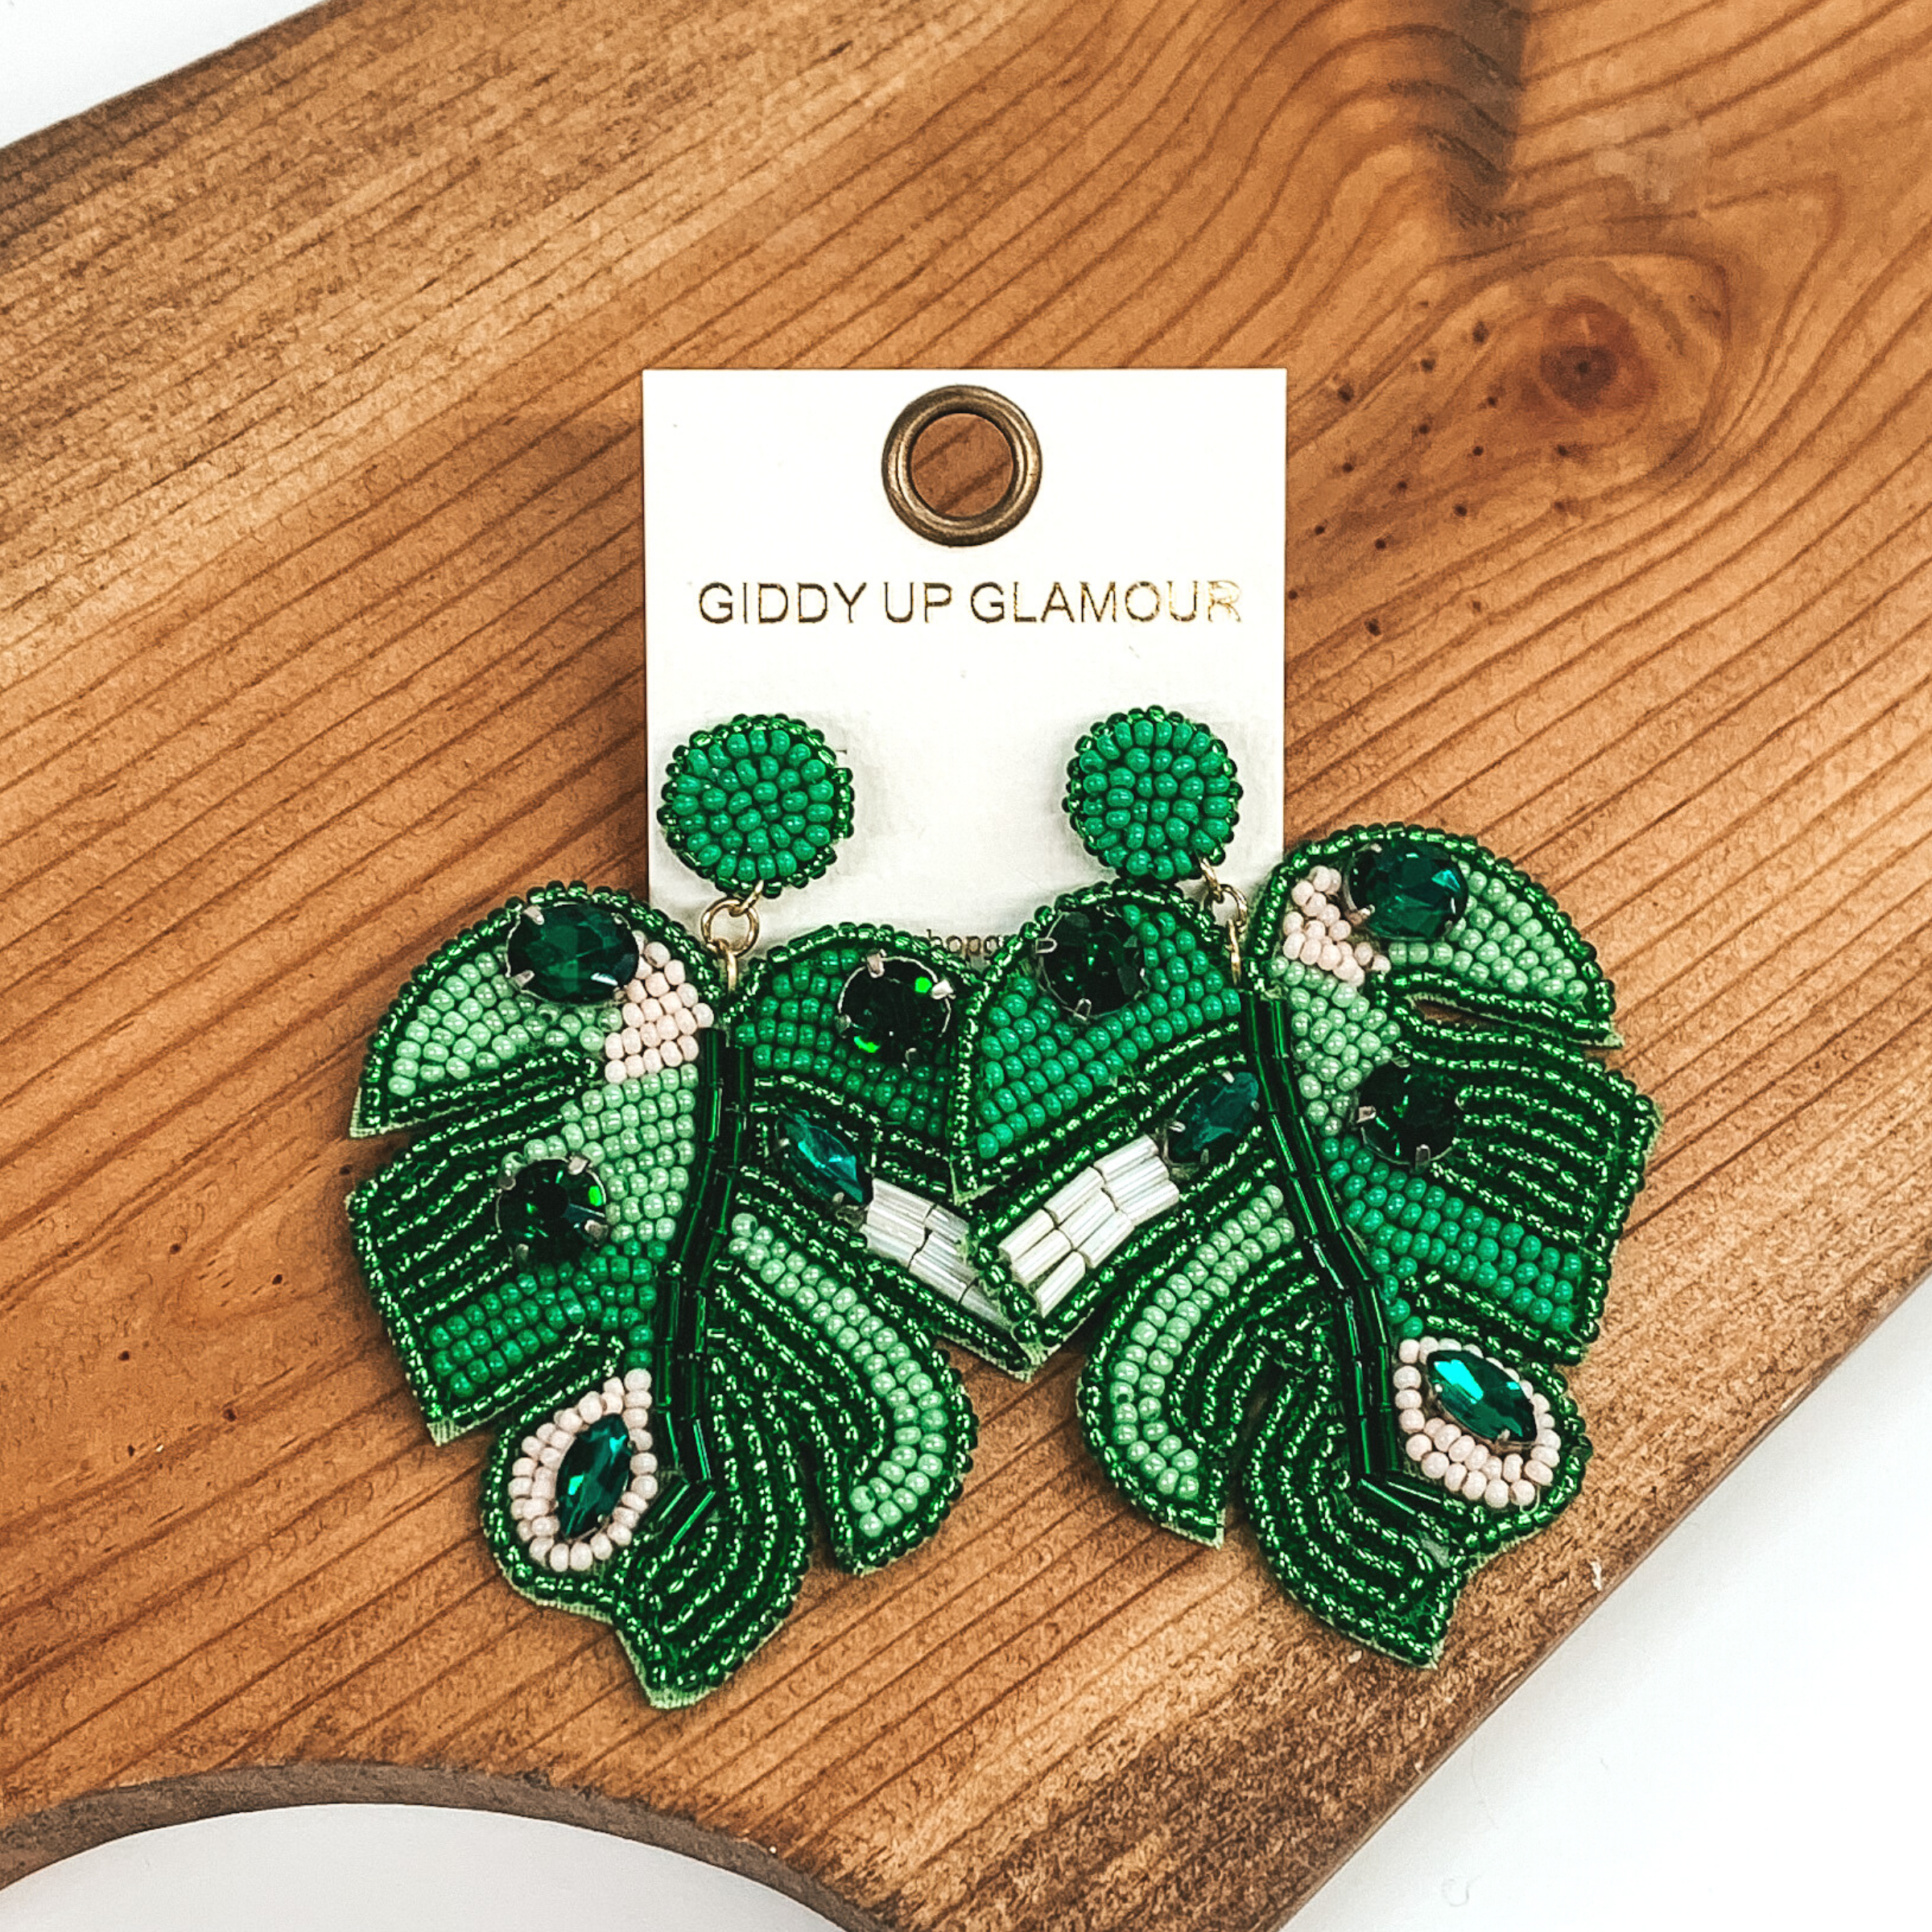 Palm Leaf Beaded Earrings With Crystal Accents in Green, Blush, and White - Giddy Up Glamour Boutique